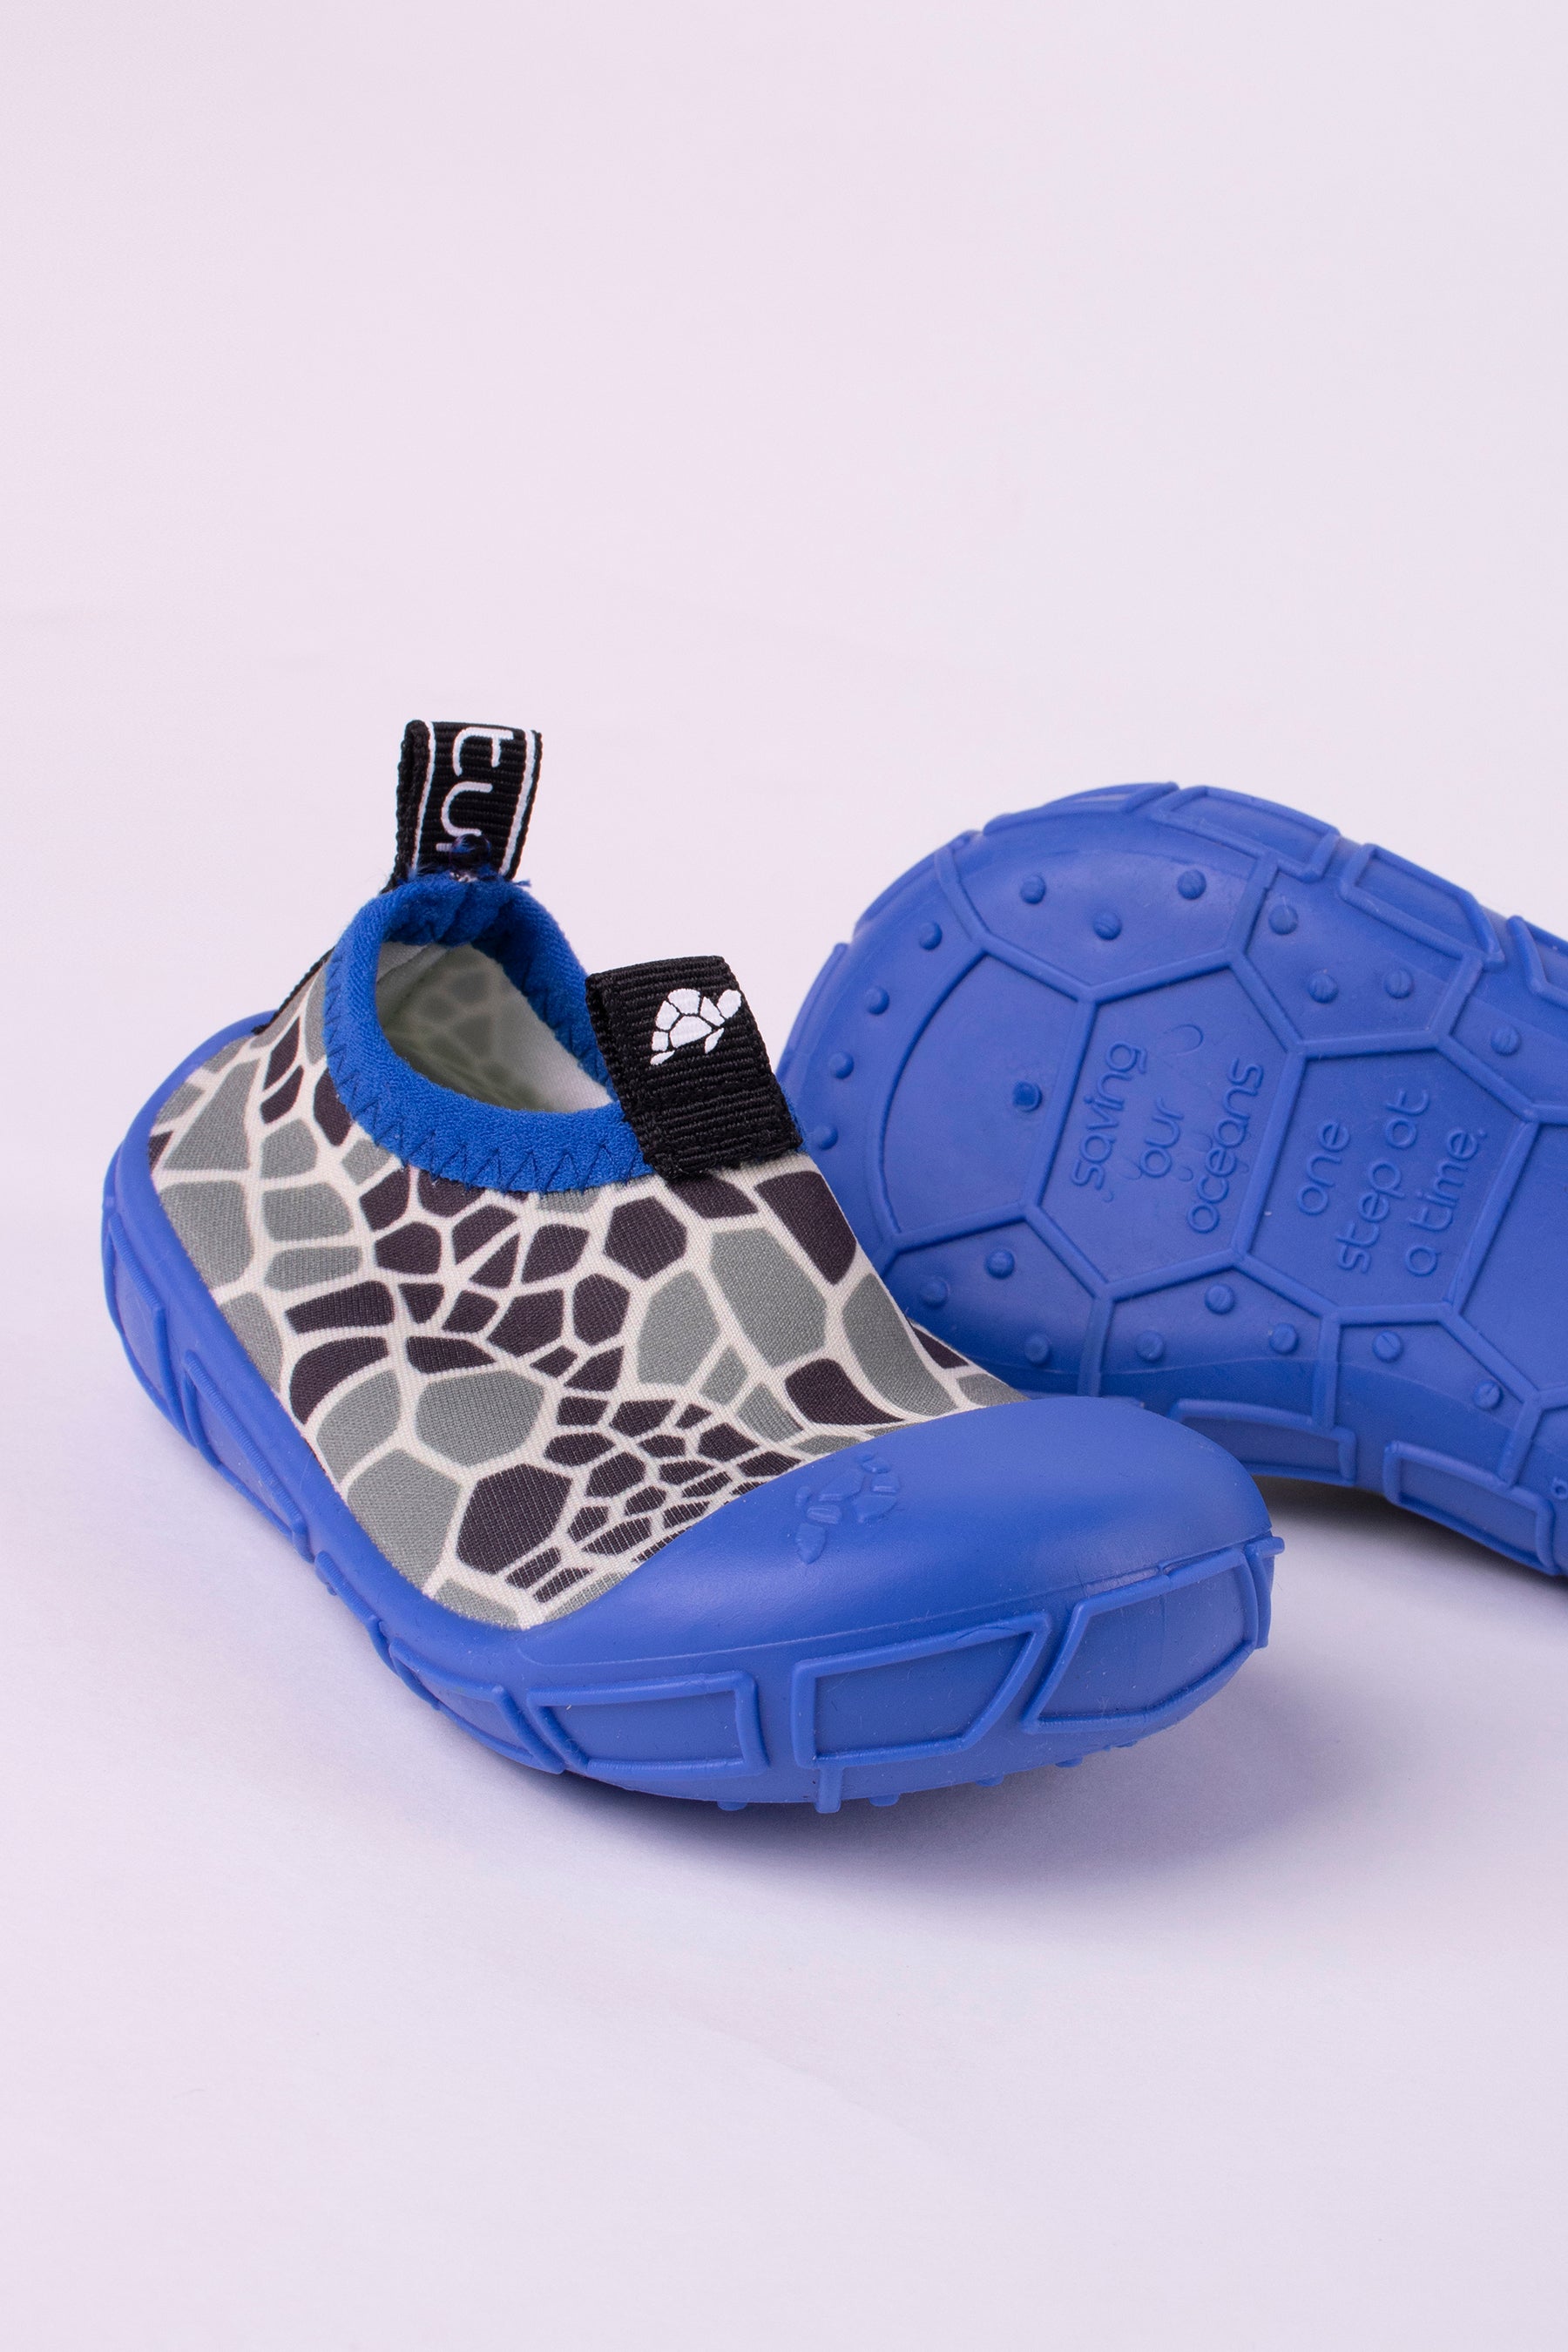 aqua/water shoes in blue with turtle shell print